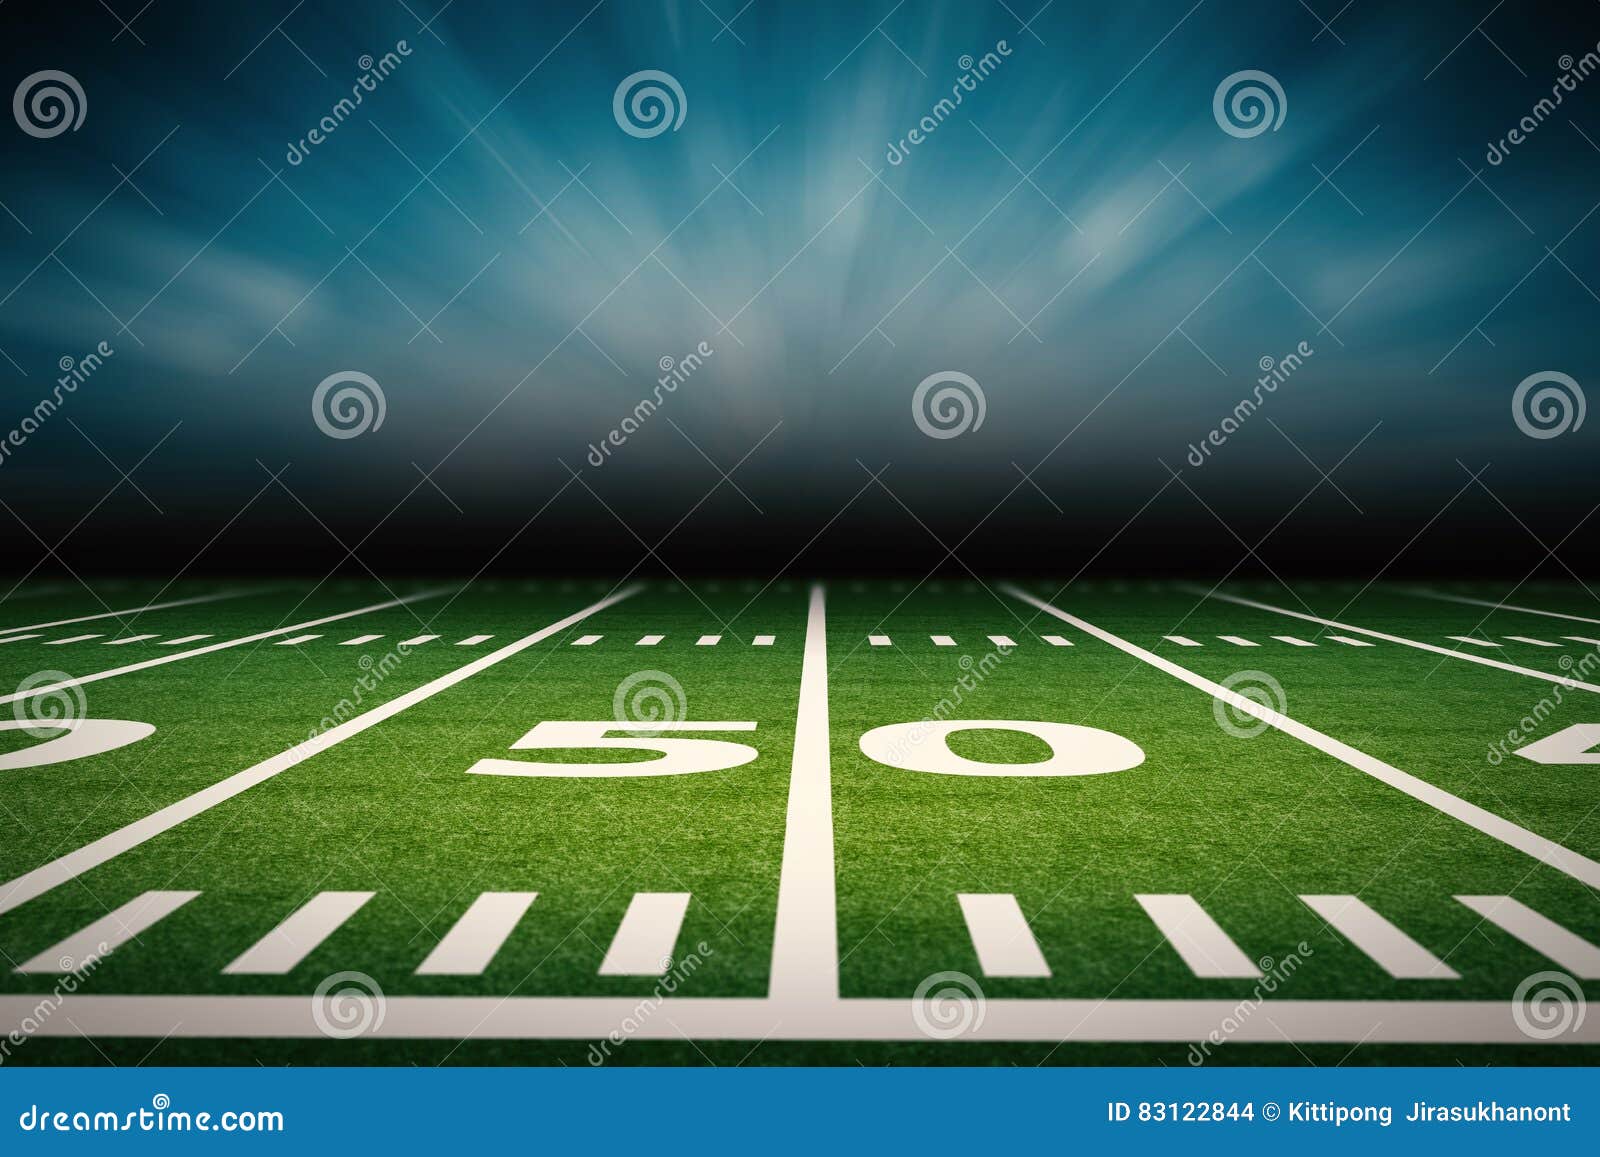 American football field stock photo. Image of line, green - 83122844